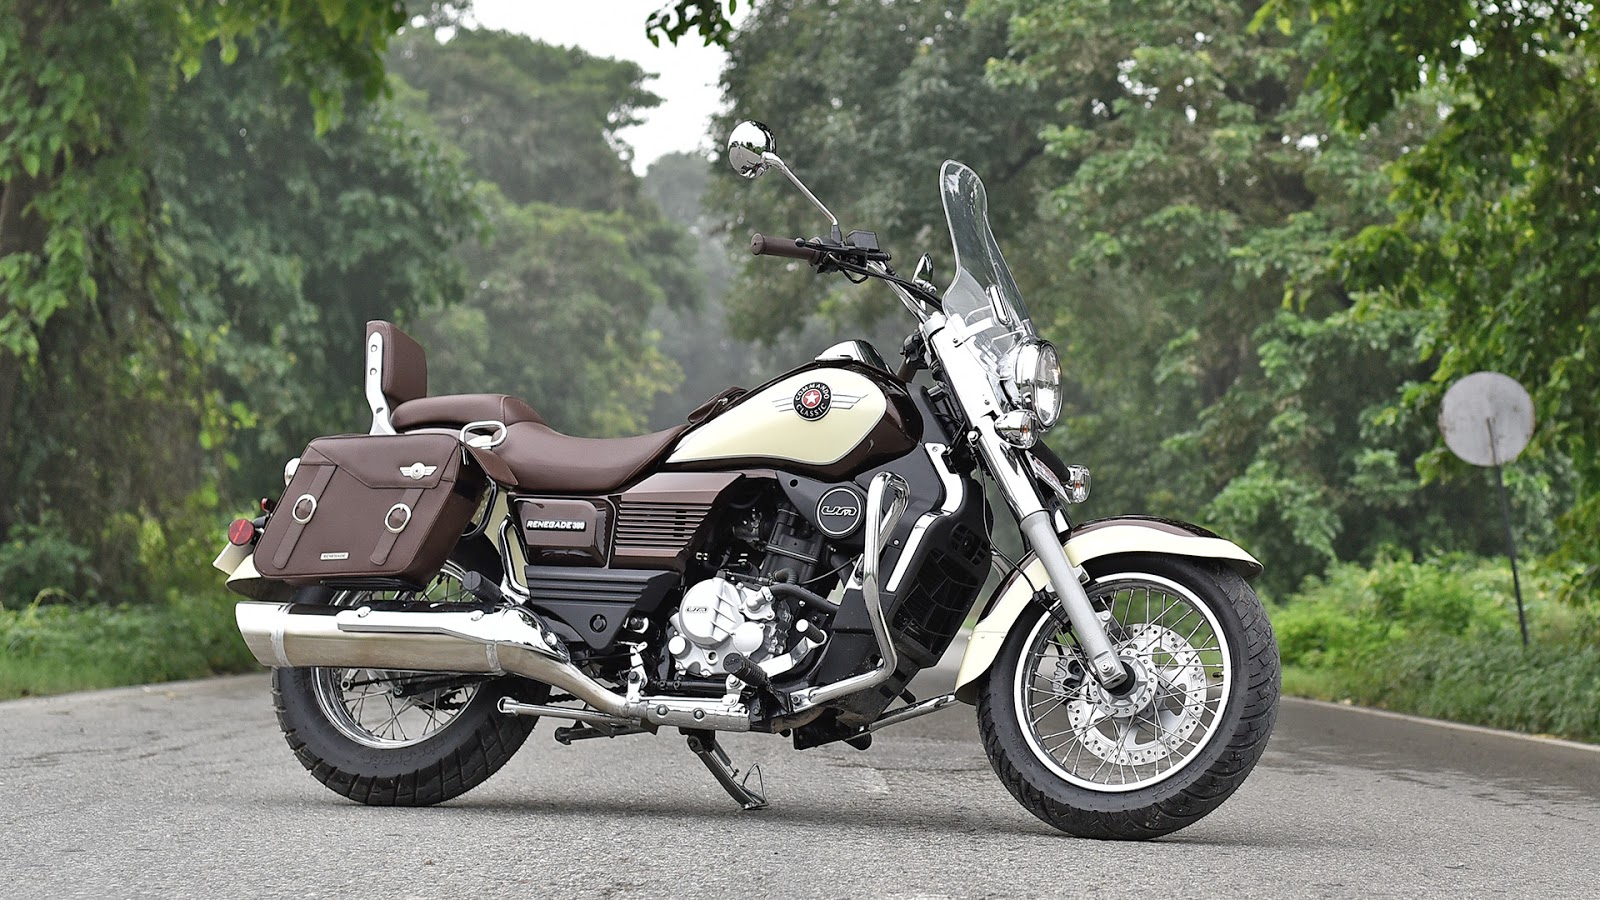 UM RENEGADE COMMANDO CLASSIC LAUNCHED AT RS.1.92 LAKH (EX-SHOWROOM